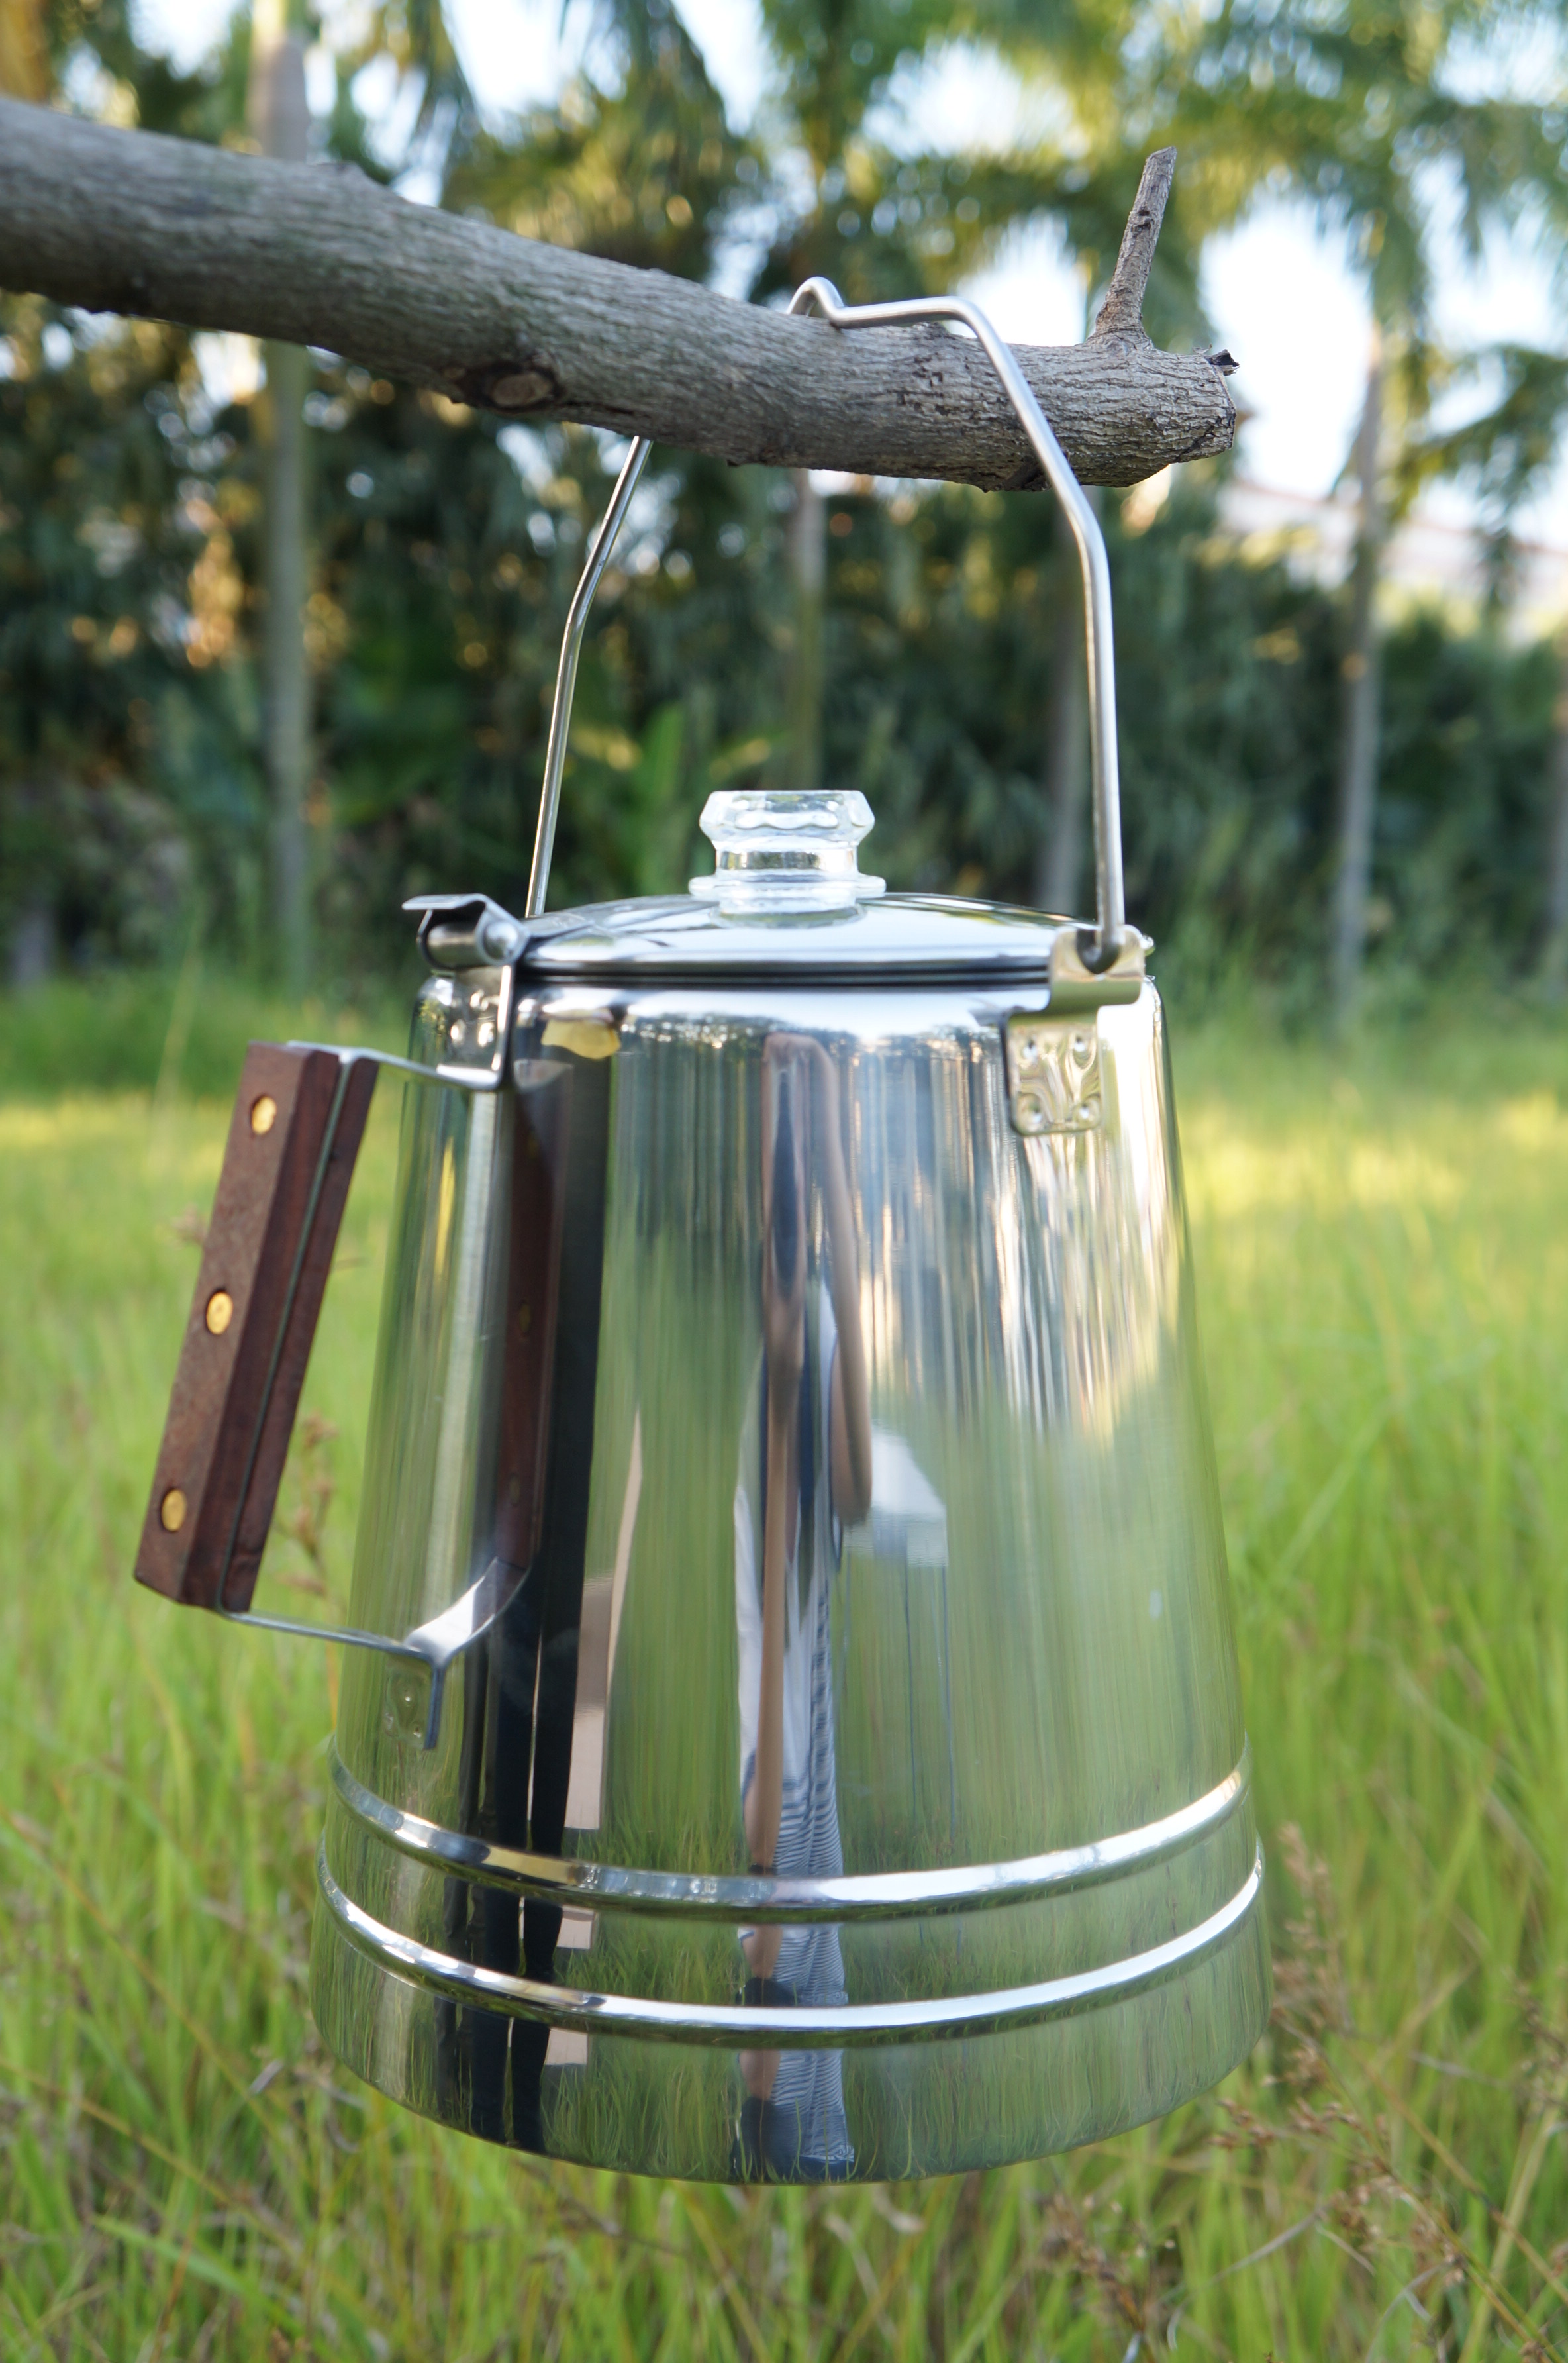 Outdoor Camping Tea Kettle Stainless Steel Hiking Pot Portable Percolator Coffee Pot with Handles And Lids for Camping Picnic